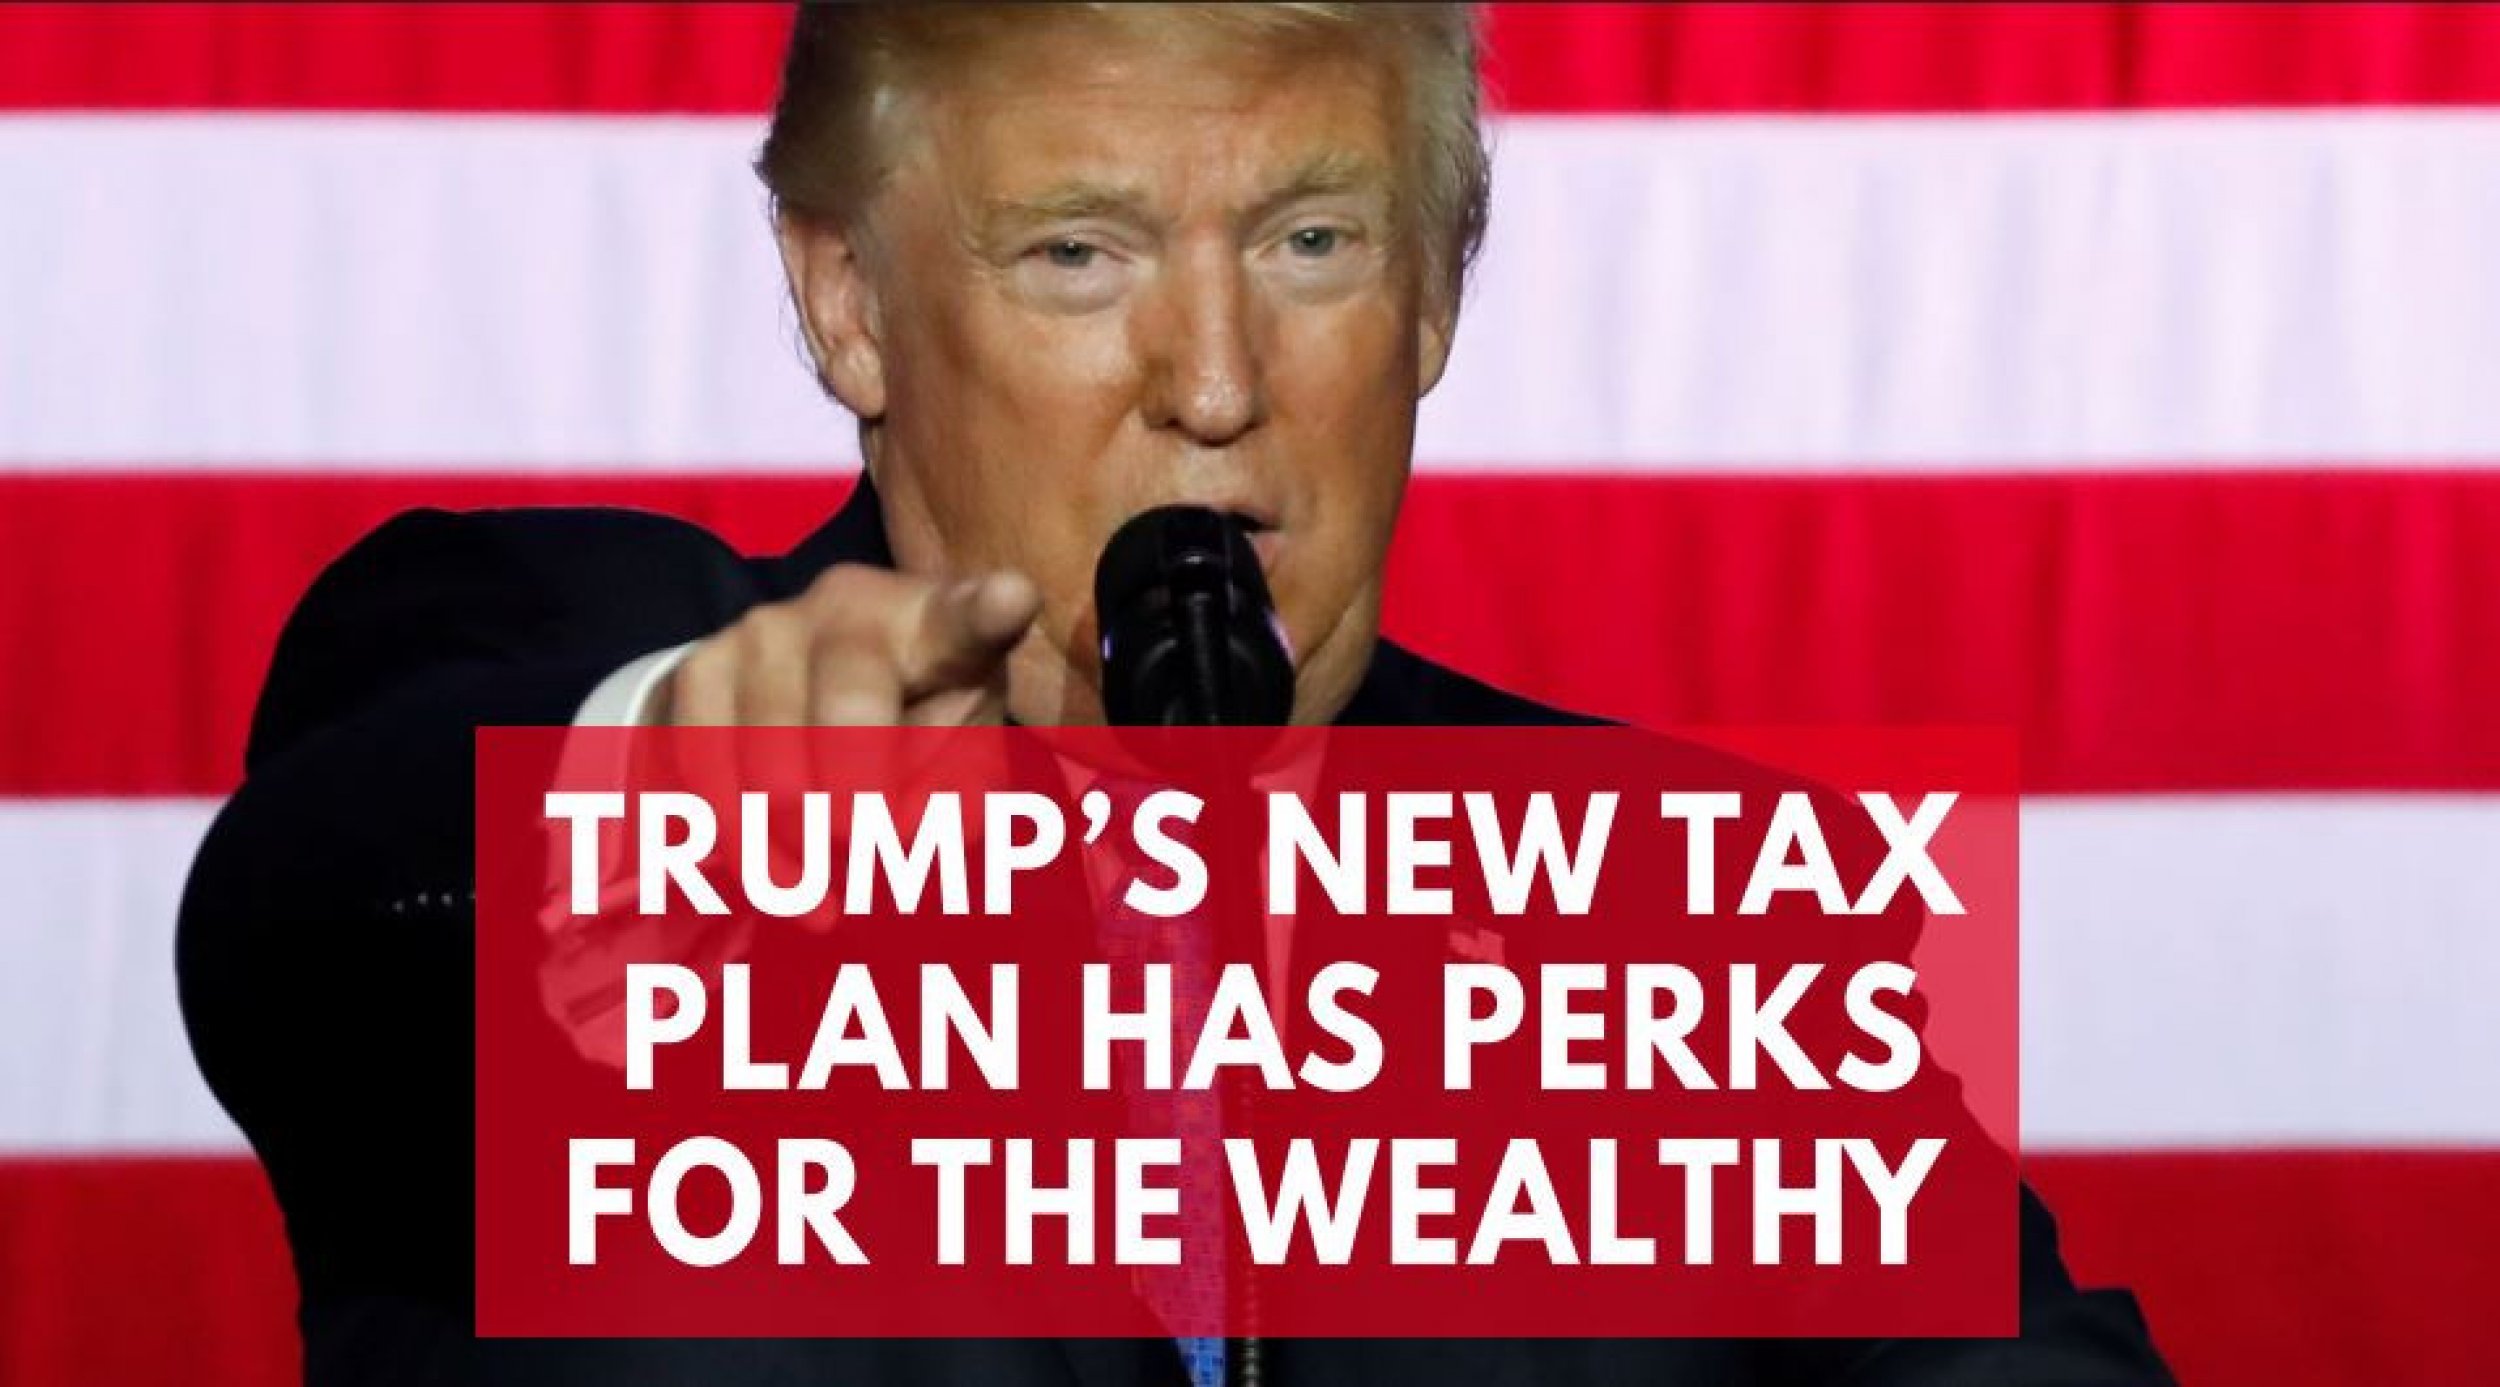  Trumps New Tax Plan What to Know About Perks for the Ultra-Wealthy